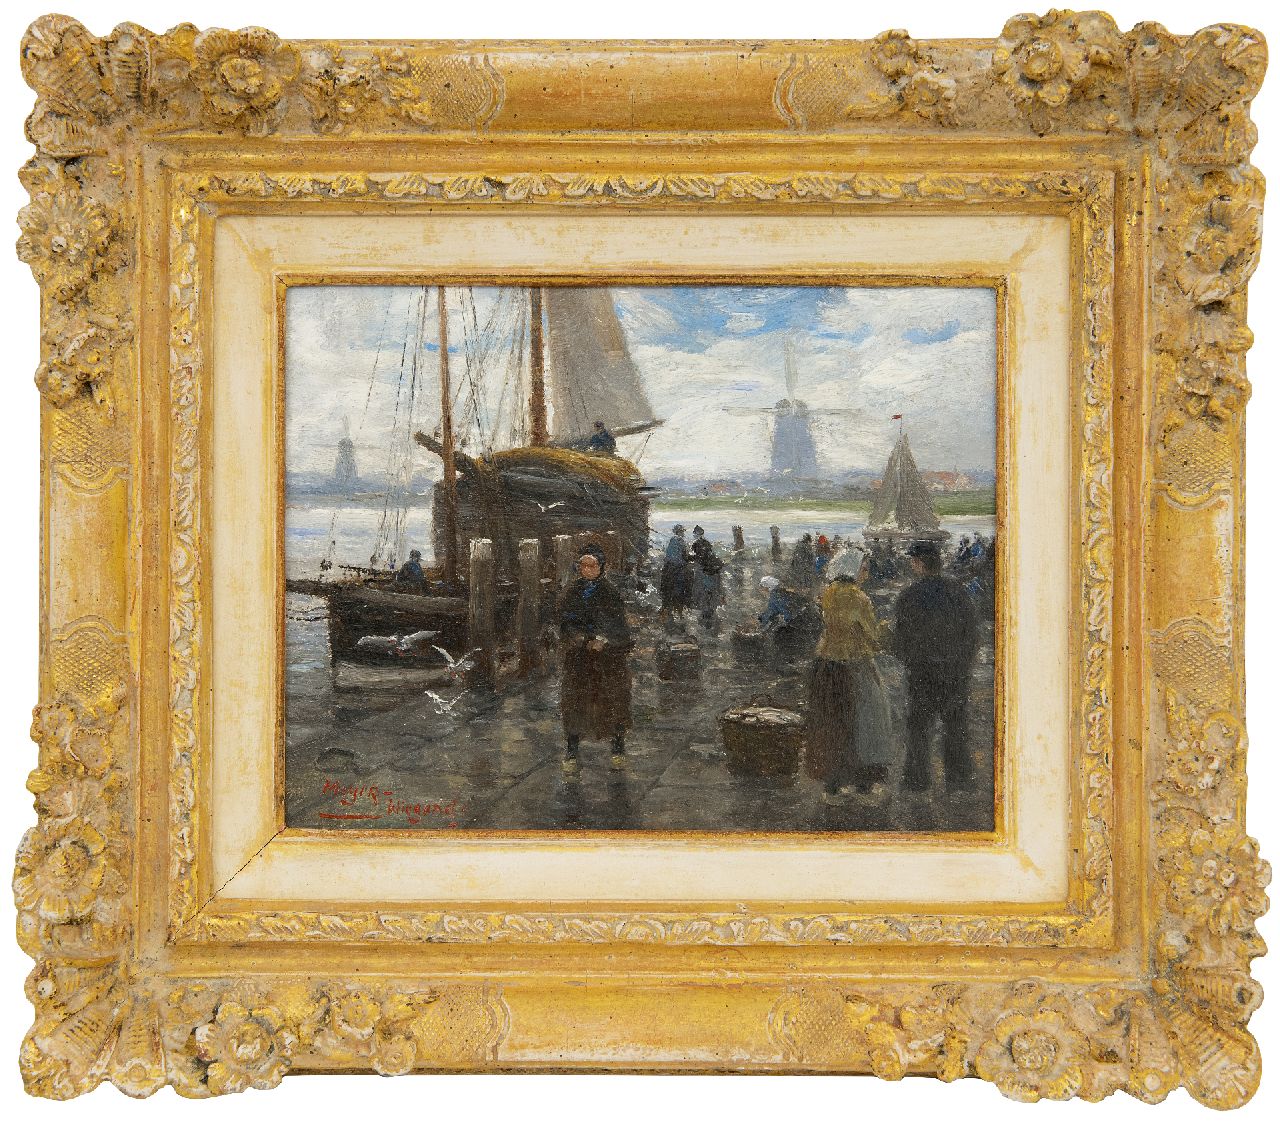 Meyer-Wiegand R.D.  | Rolf Dieter Meyer-Wiegand | Paintings offered for sale | Fishmarket on a quay, Holland, oil on panel 13.9 x 17.9 cm, signed l.l.